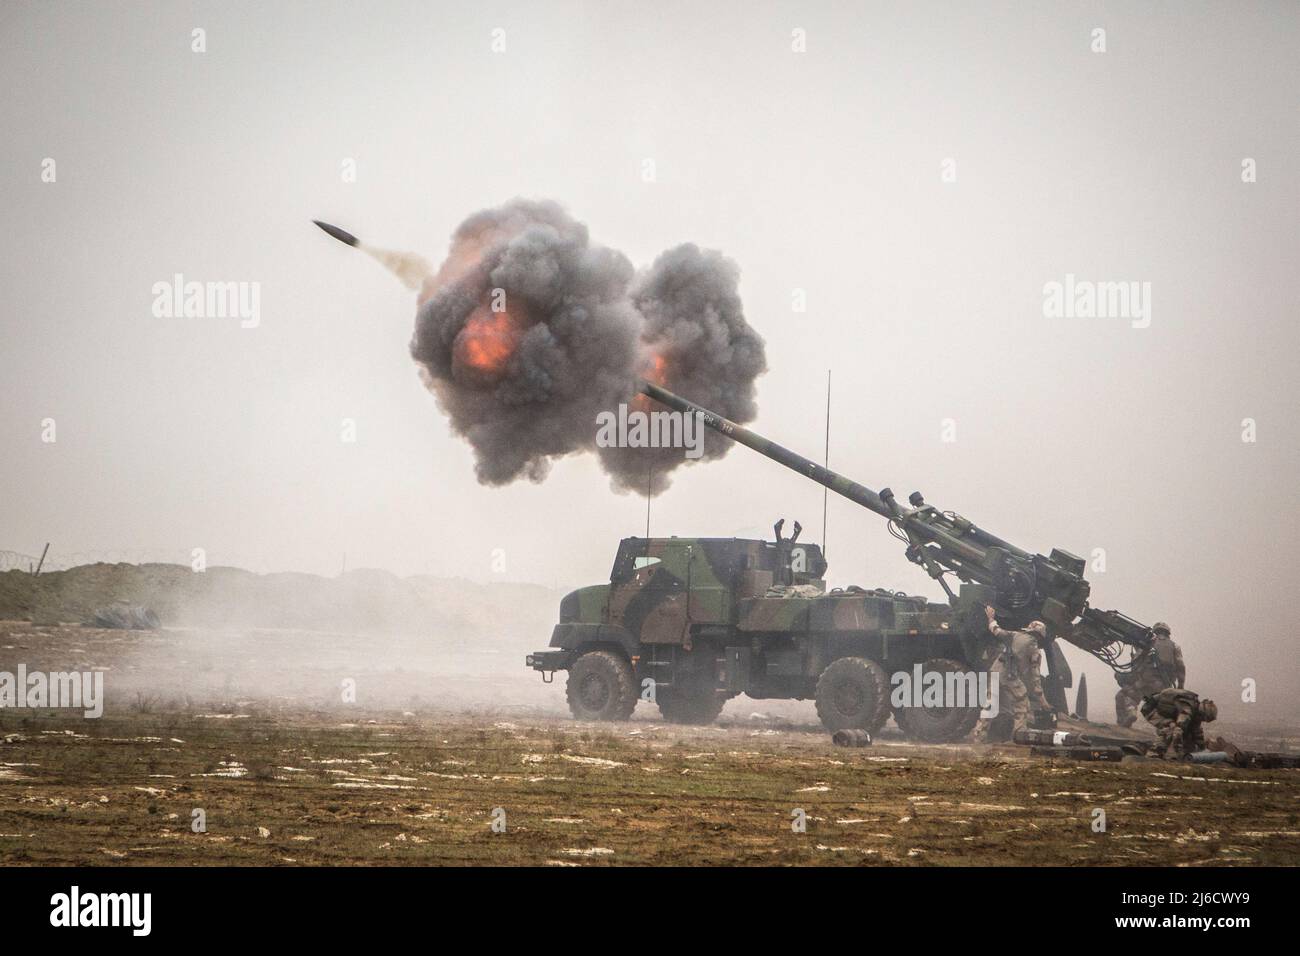 Baghouz, Syria. 02 December, 2018. French Army artillerymen fire the Caesar self-propelled howitzer at Islamic State targets in the Middle Euphrates River Valley during Operation Inherent Resolve at Firebase Saham, December 2, 2018 in Baghouz, Syria.  Credit: S1C Mikki Sprenkle/US Army Photo/Alamy Live News Stock Photo